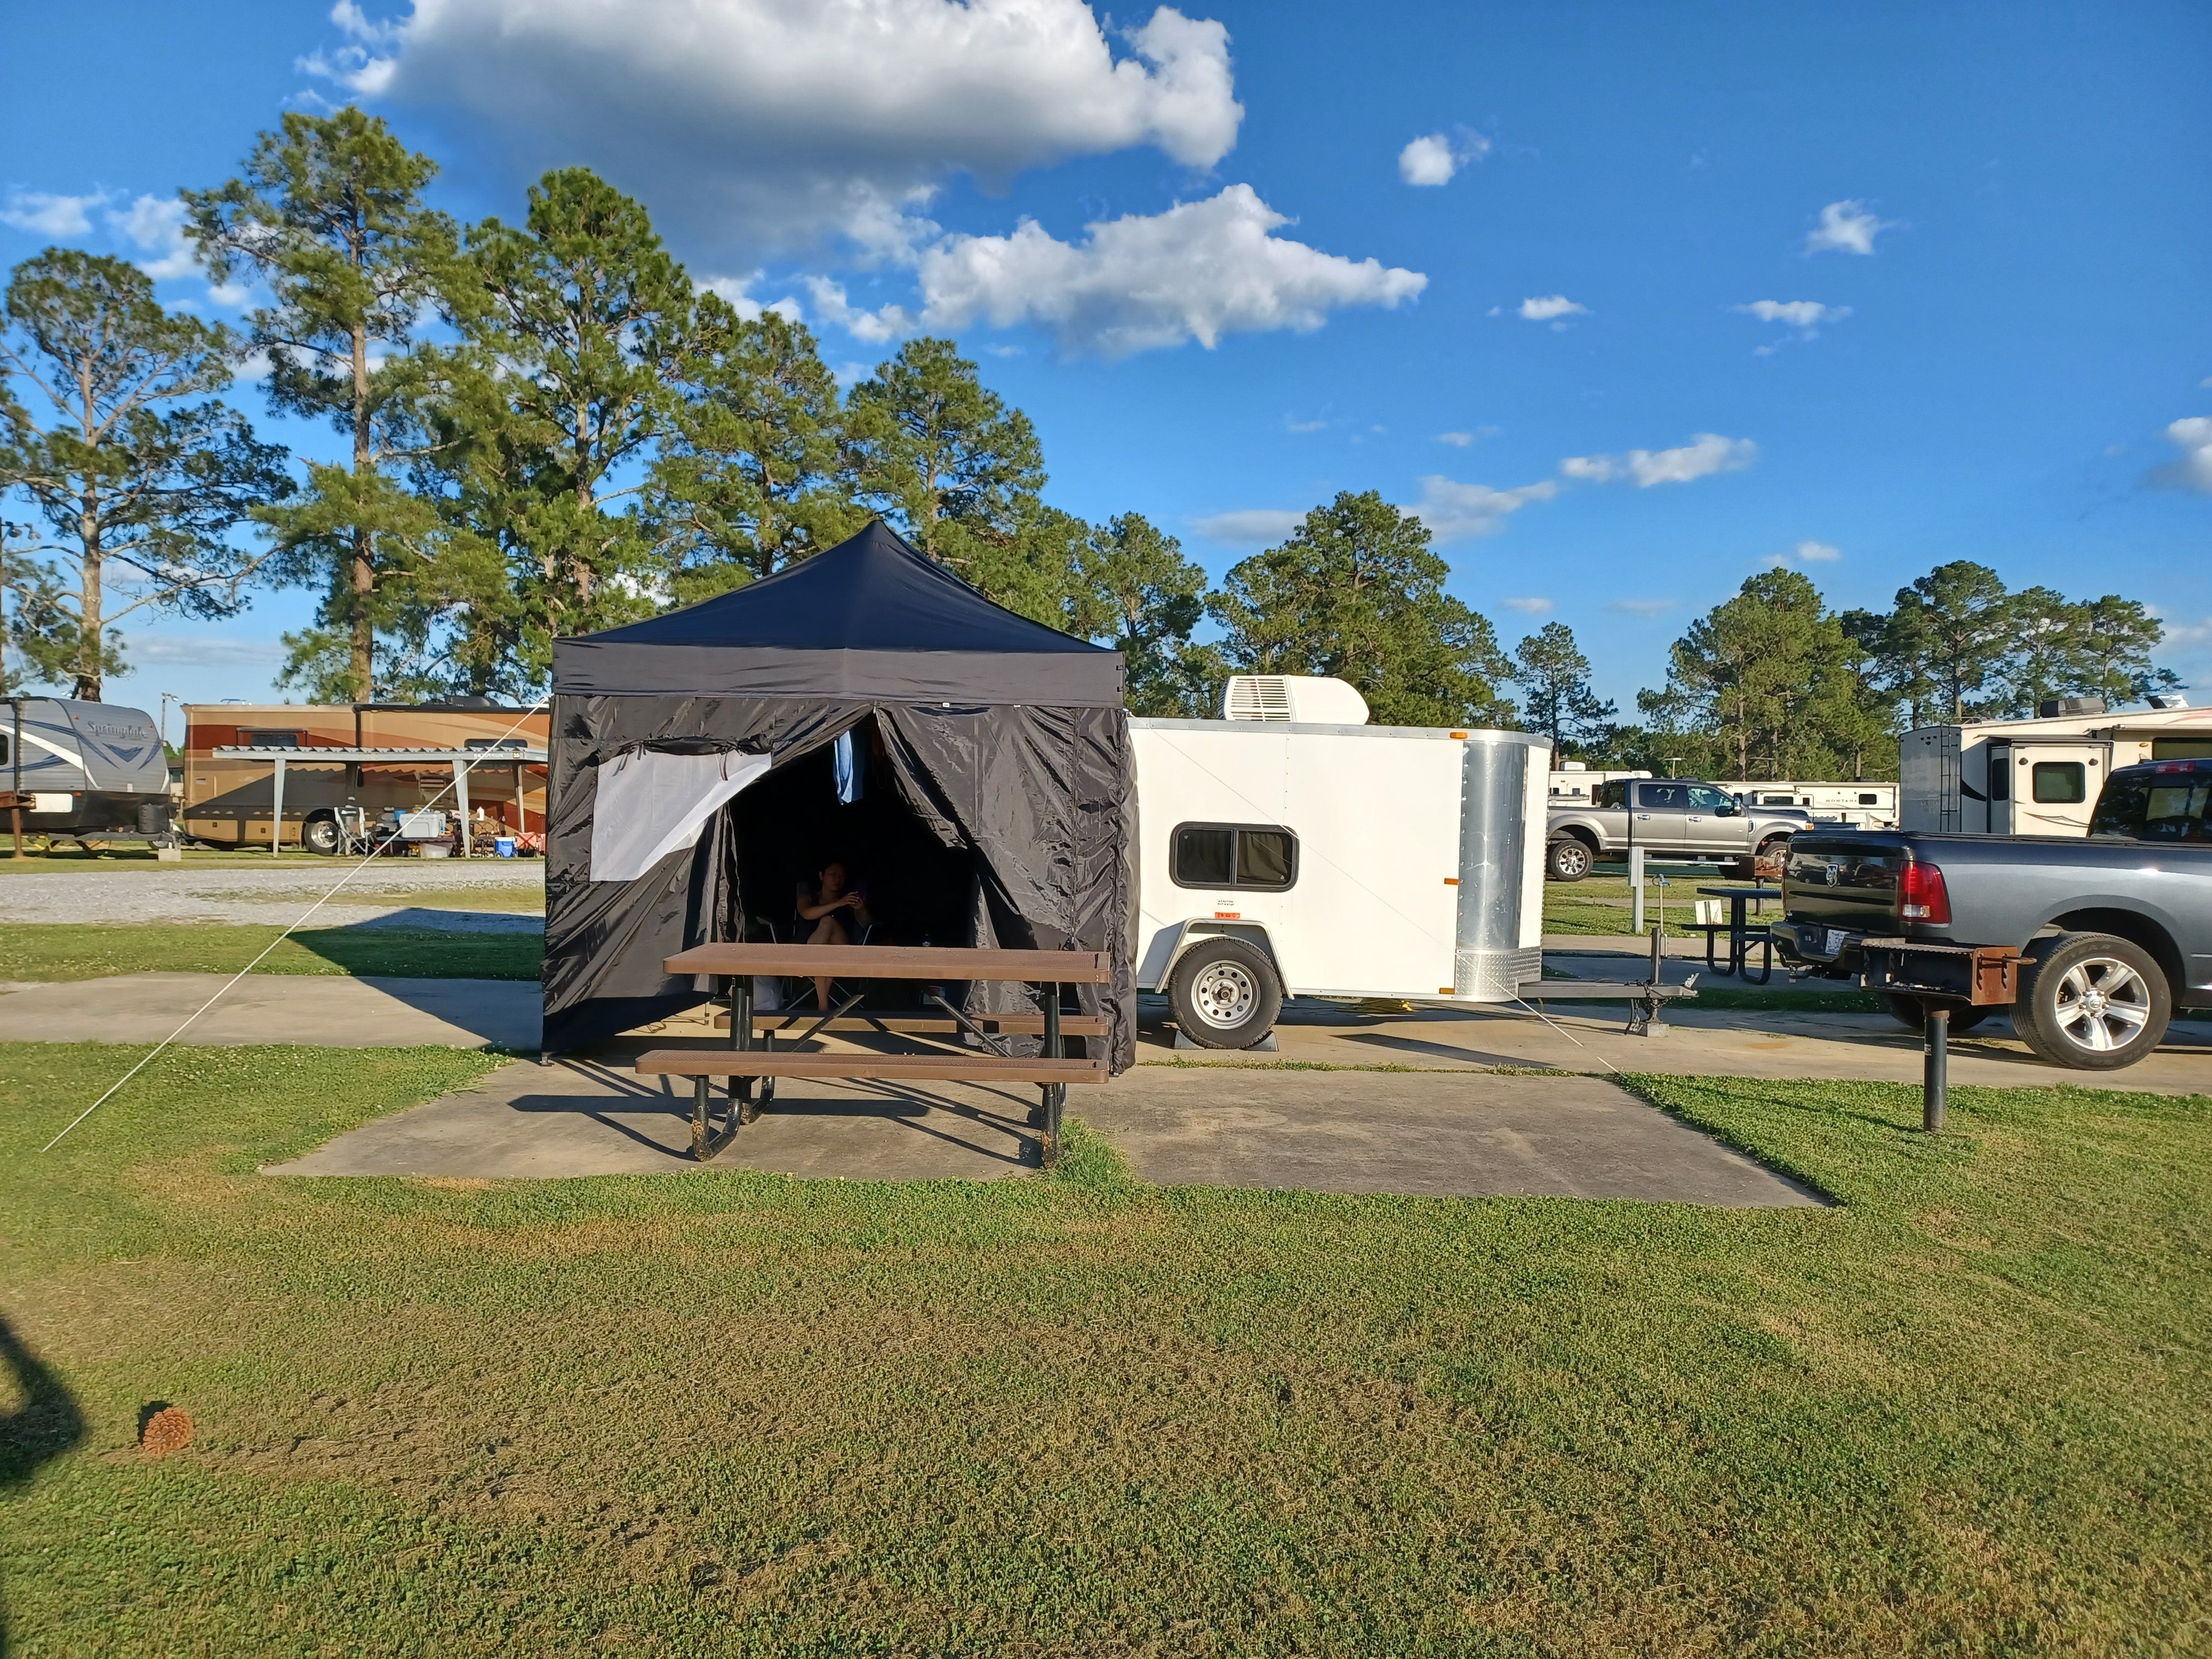 Camper submitted image from Maxwell-Gunter AFB FamCamp - 3